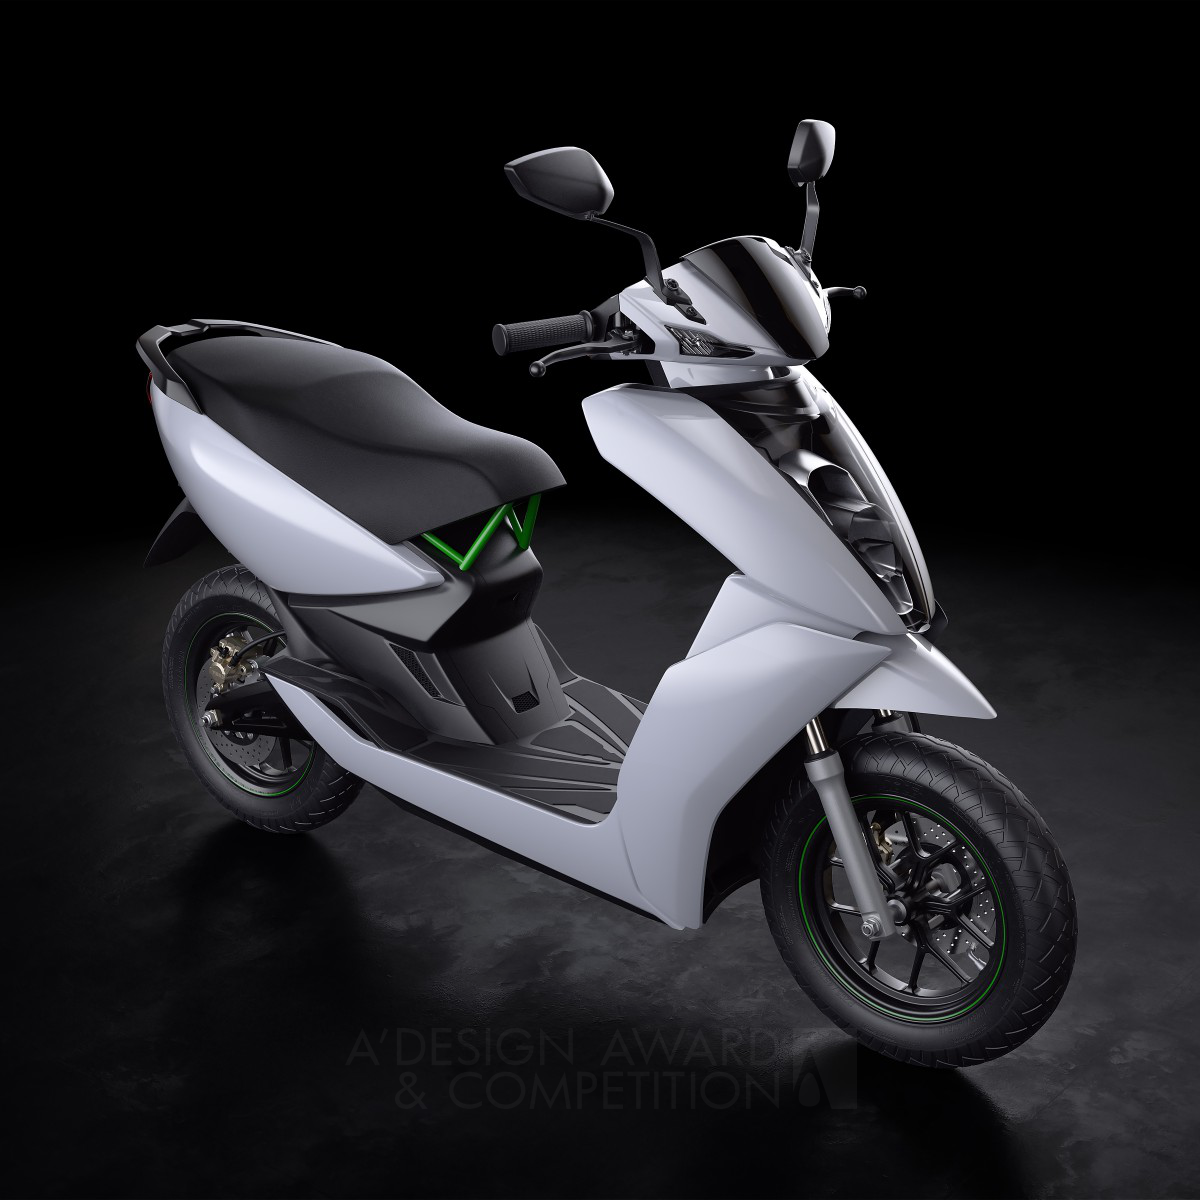 Ather S340 Smart Electric Scooter by Ather Energy